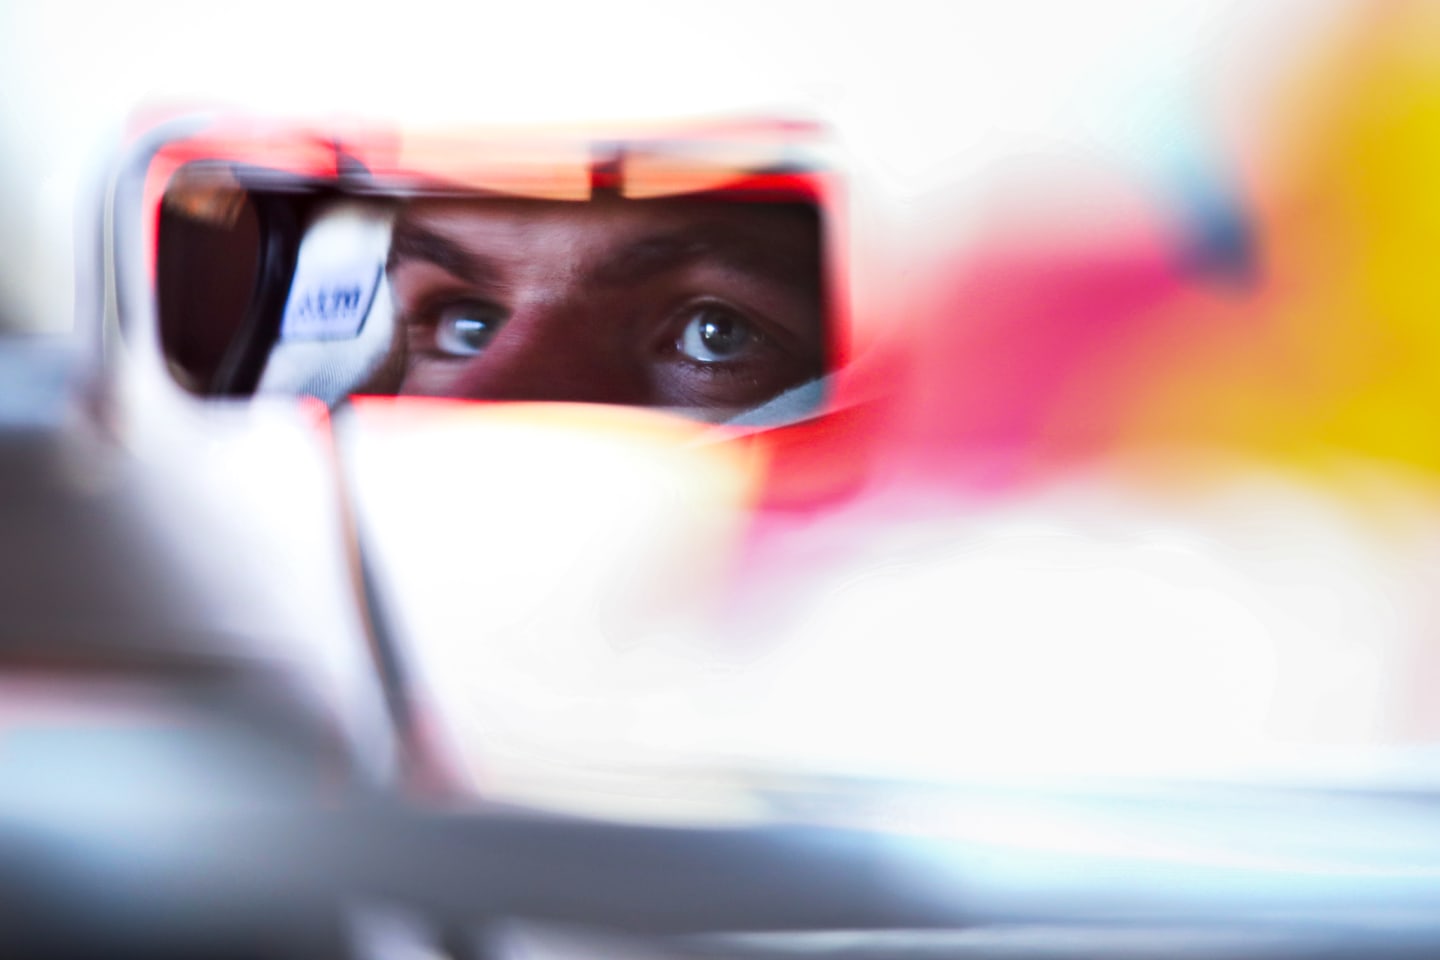 NUERBURG, GERMANY - OCTOBER 10: A reflection in the wing mirror as Max Verstappen of Netherlands and Red Bull Racing looks on from his car during qualifying ahead of the F1 Eifel Grand Prix at Nuerburgring on October 10, 2020 in Nuerburg, Germany. (Photo by Mark Thompson/Getty Images)